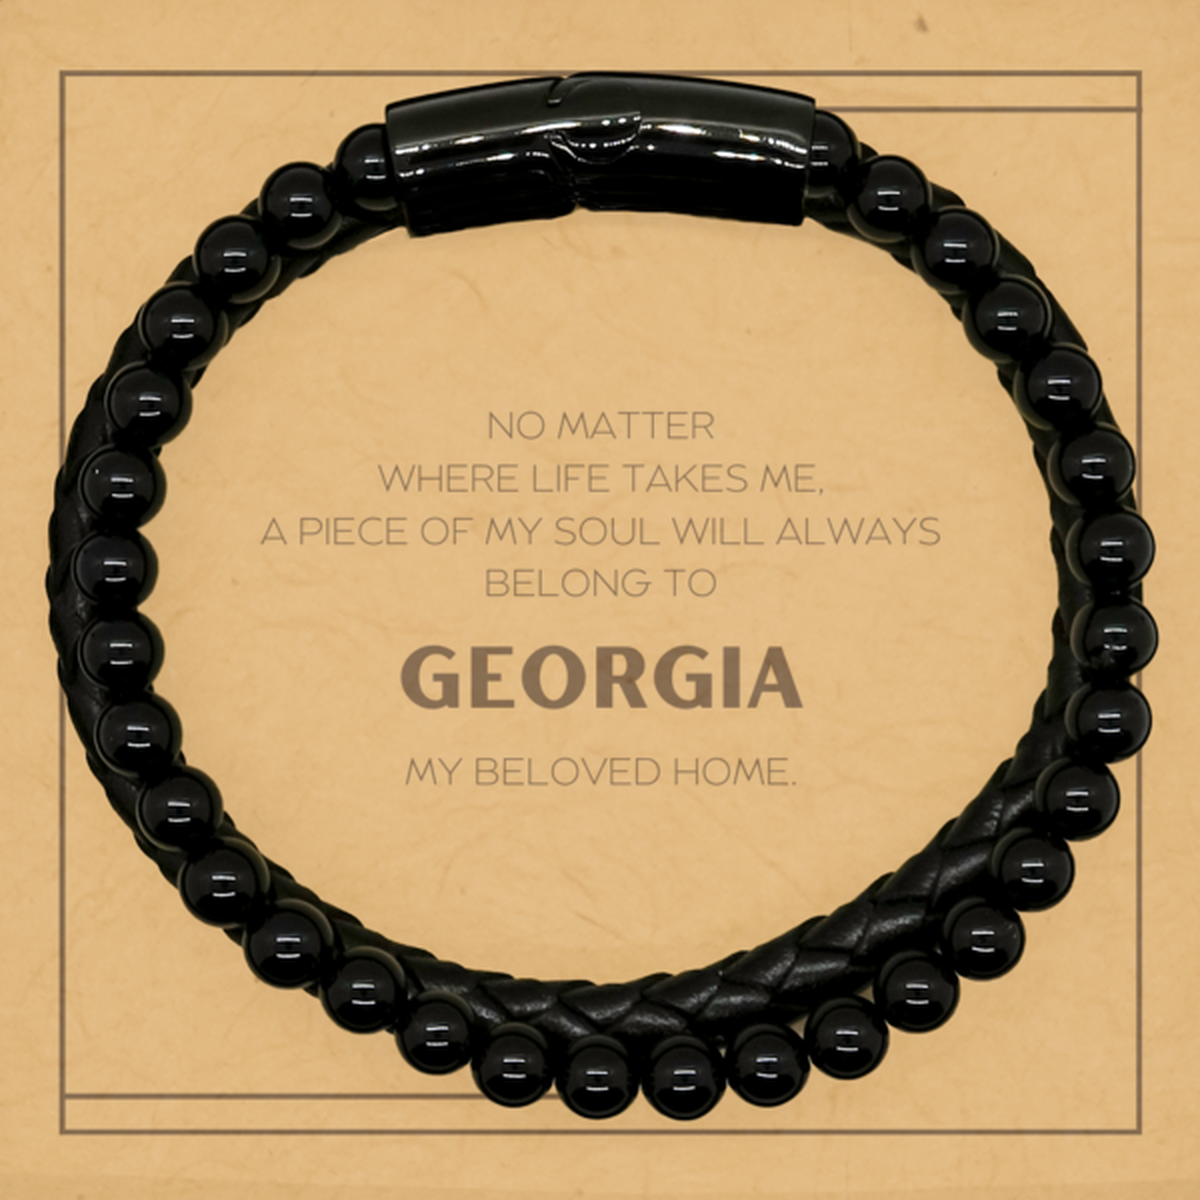 Love Georgia State Gifts, My soul will always belong to Georgia, Proud Stone Leather Bracelets, Birthday Unique Gifts For Georgia Men, Women, Friends